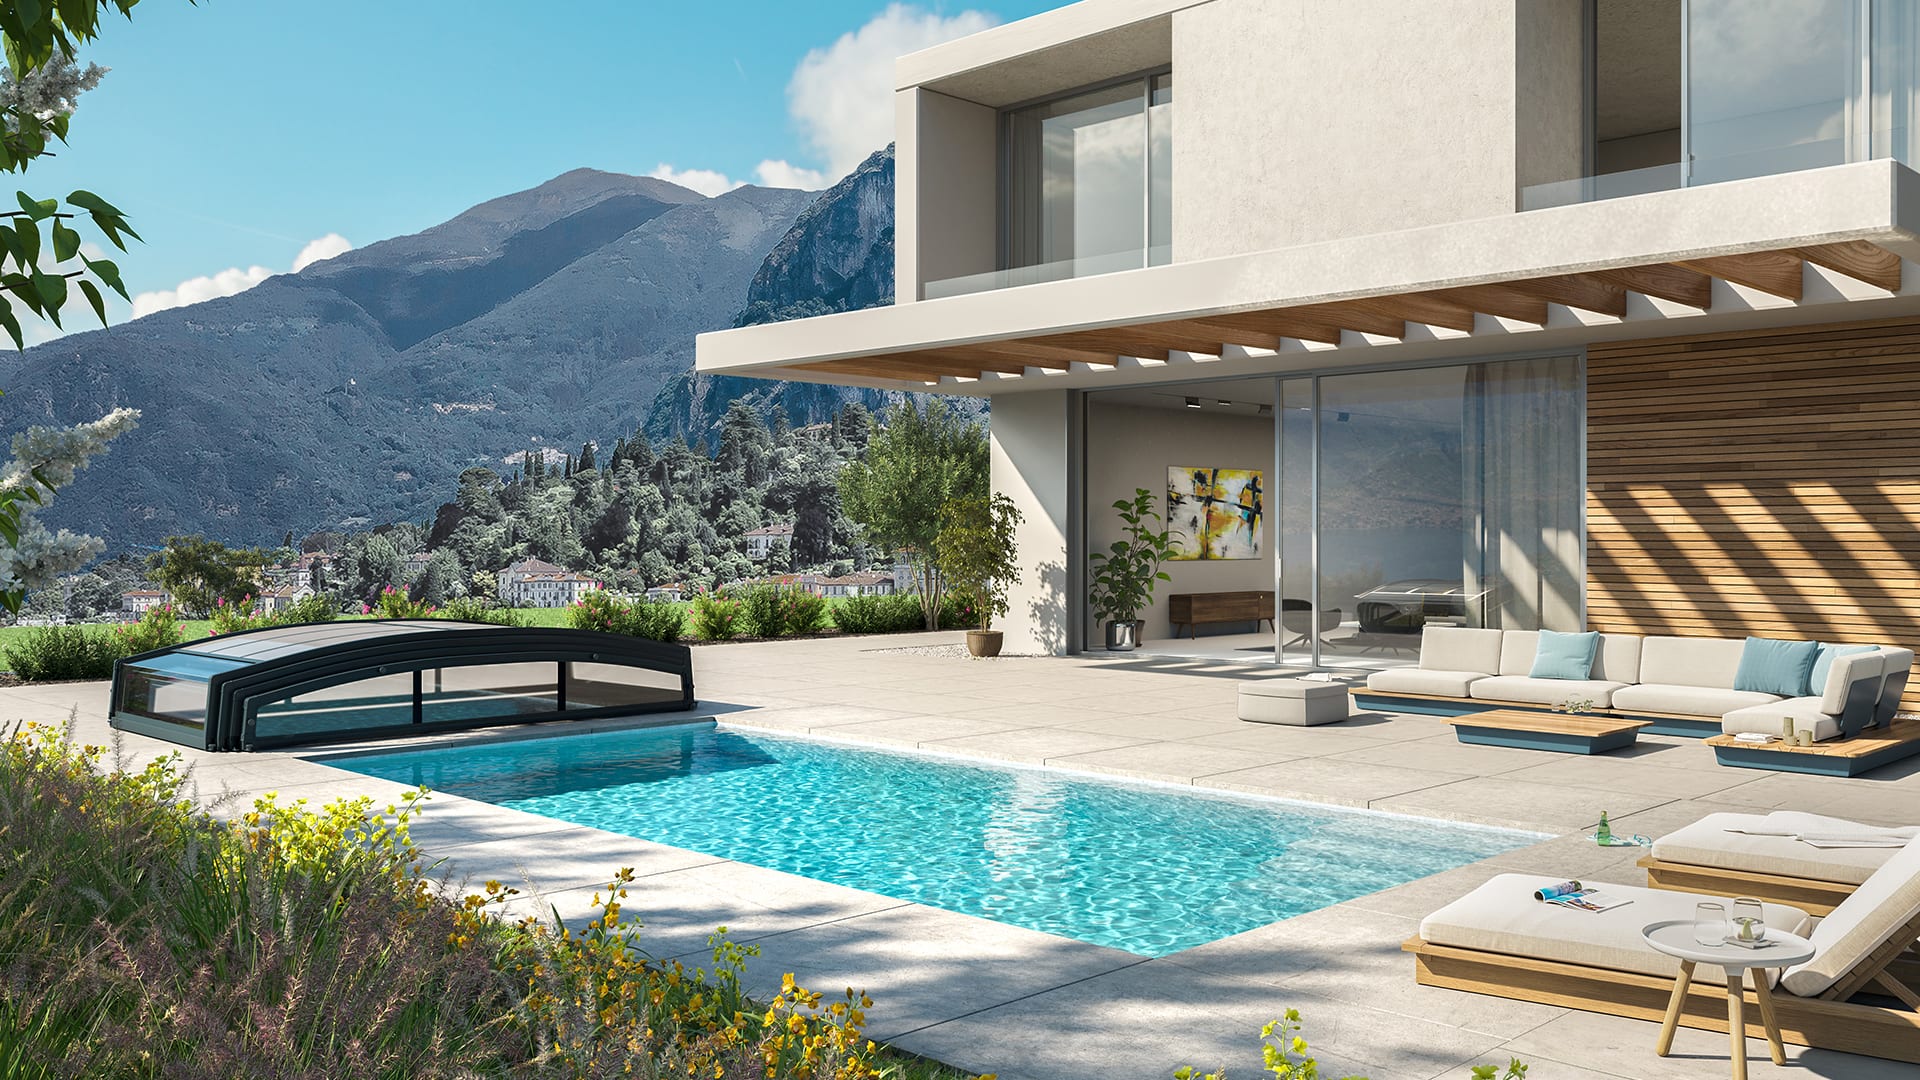 Maayan-Golan_Architectural-Visualization_product-visualization_outdoor-pool-cover_palram-applications_03